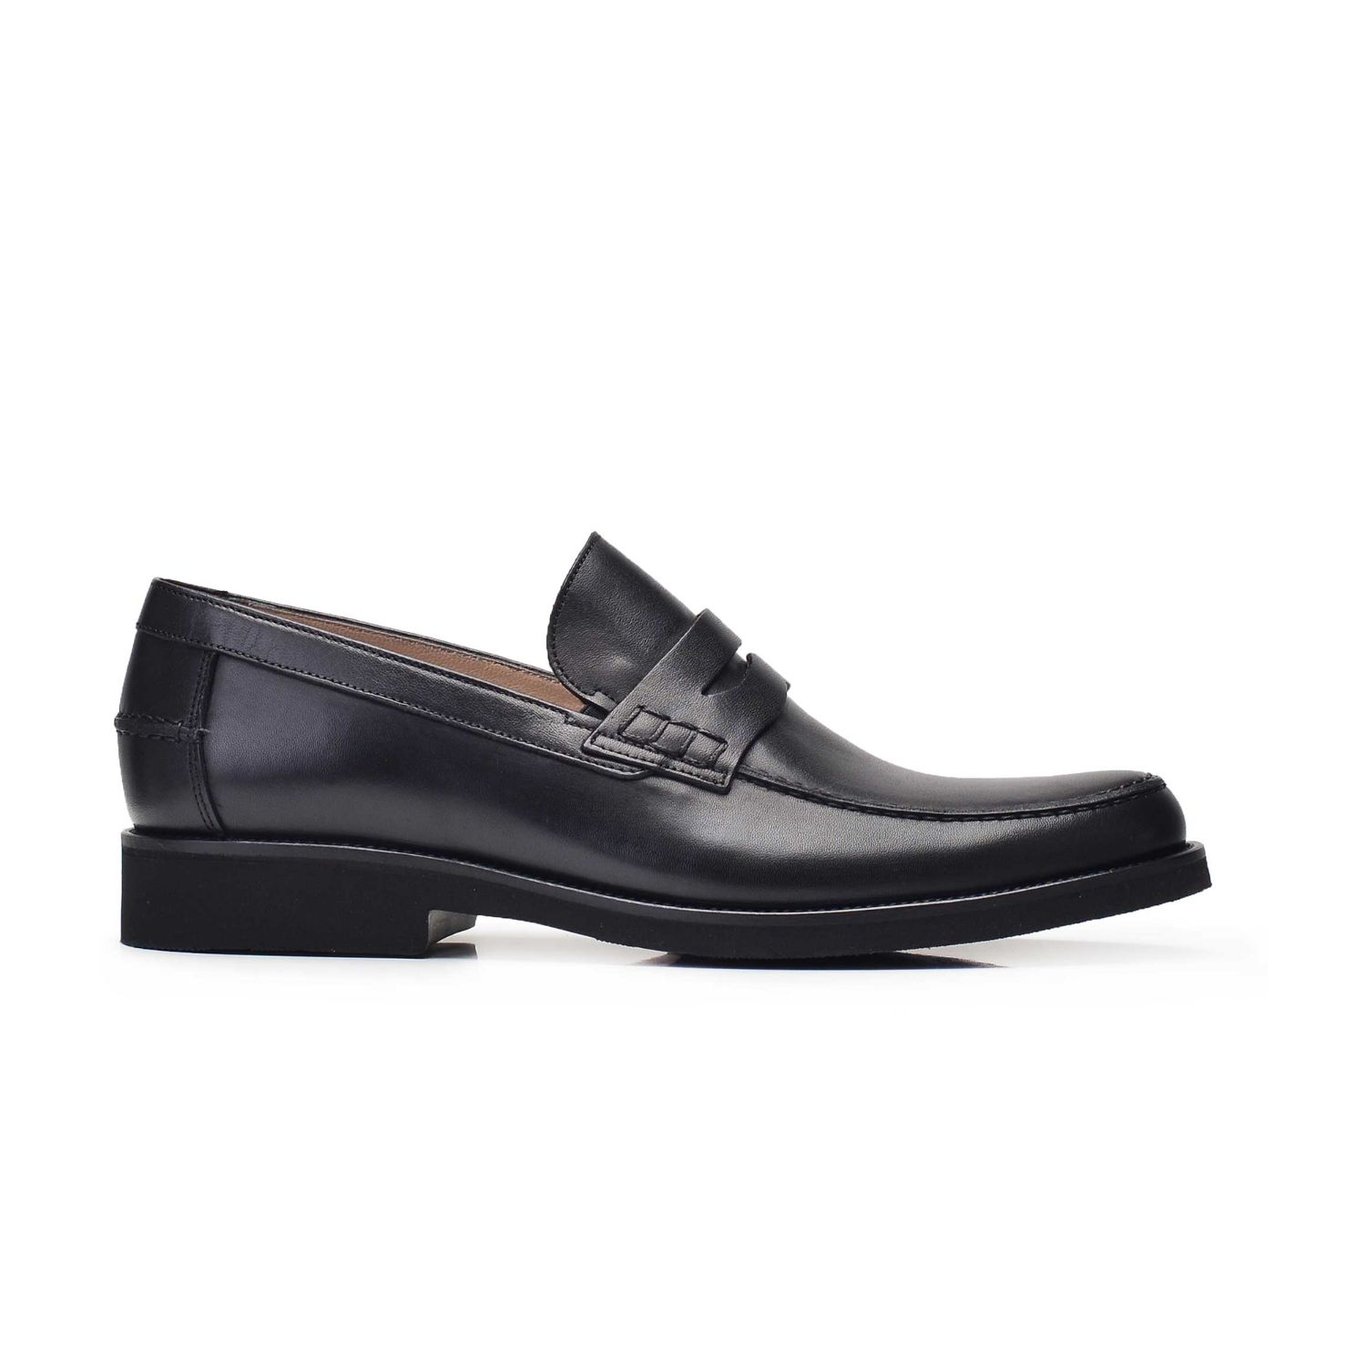 Nevzat Onay Genuine Leather Black Men Classical Shoes -10780-